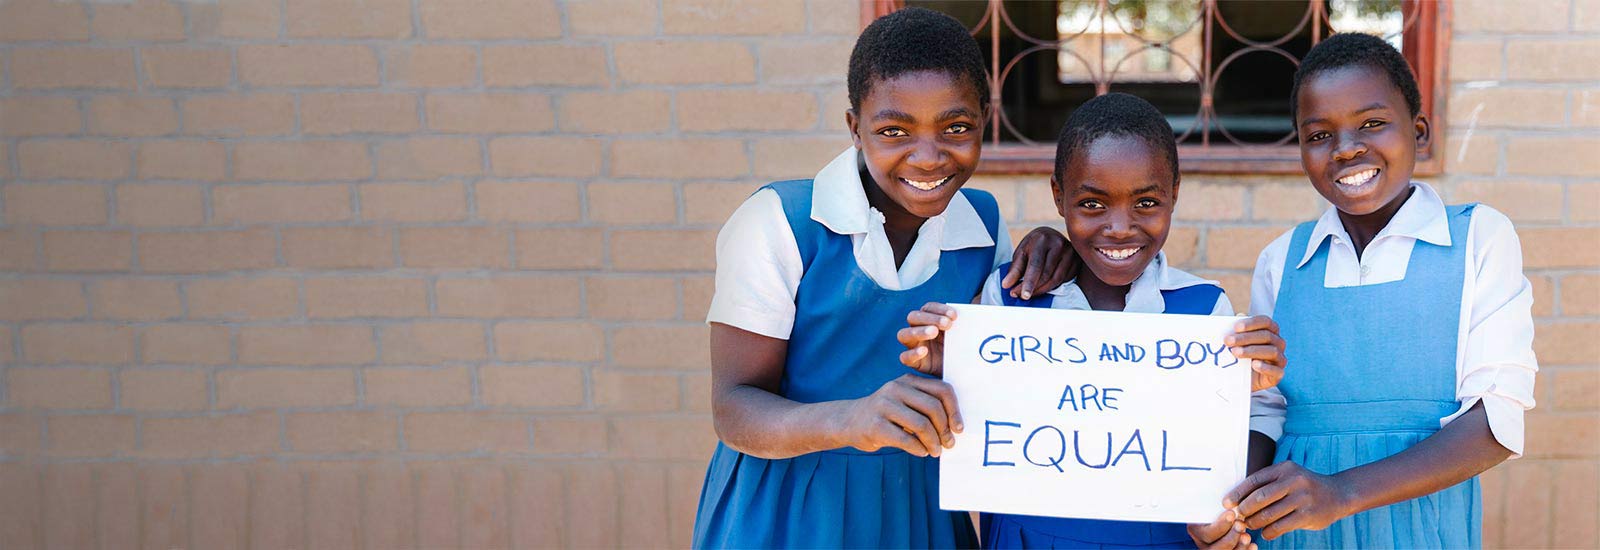 Three girls grinning and holding a "Girls and boys are equal" sign, while standing shoulder by shoulder in front of a school